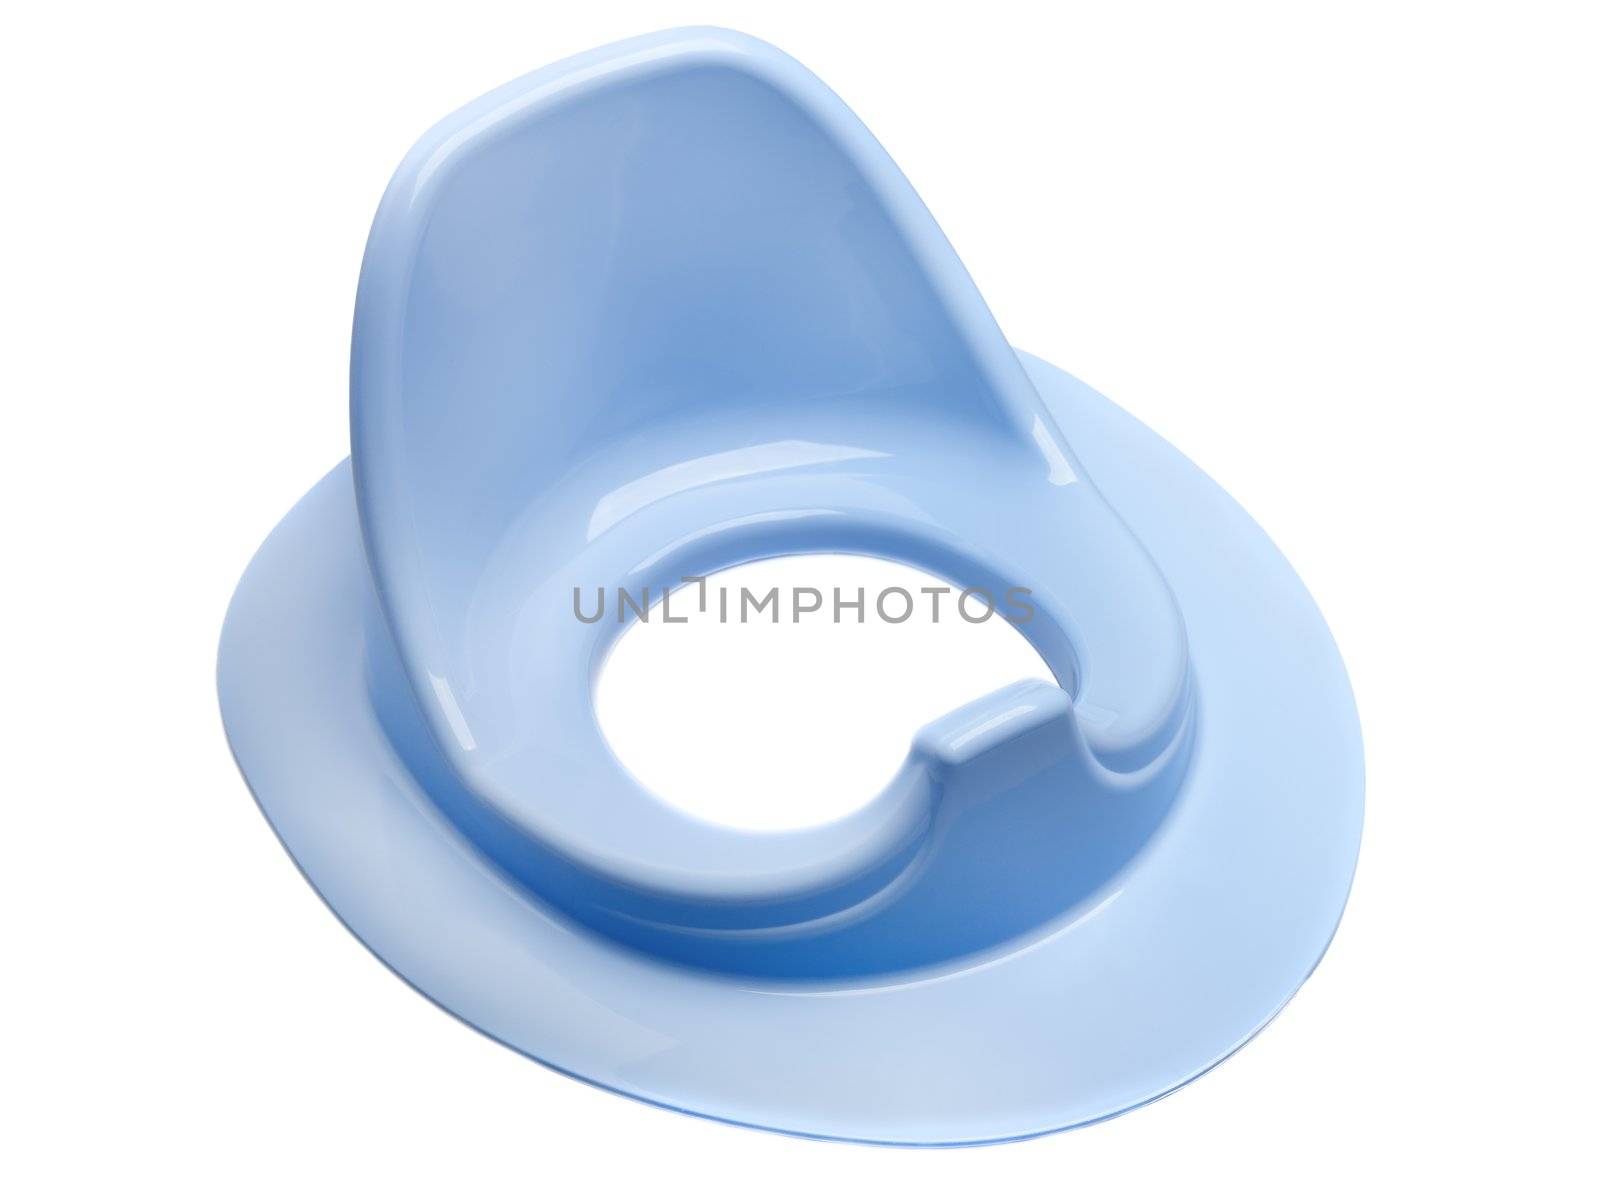 Toilet bowl sink baby child potty seat isolated